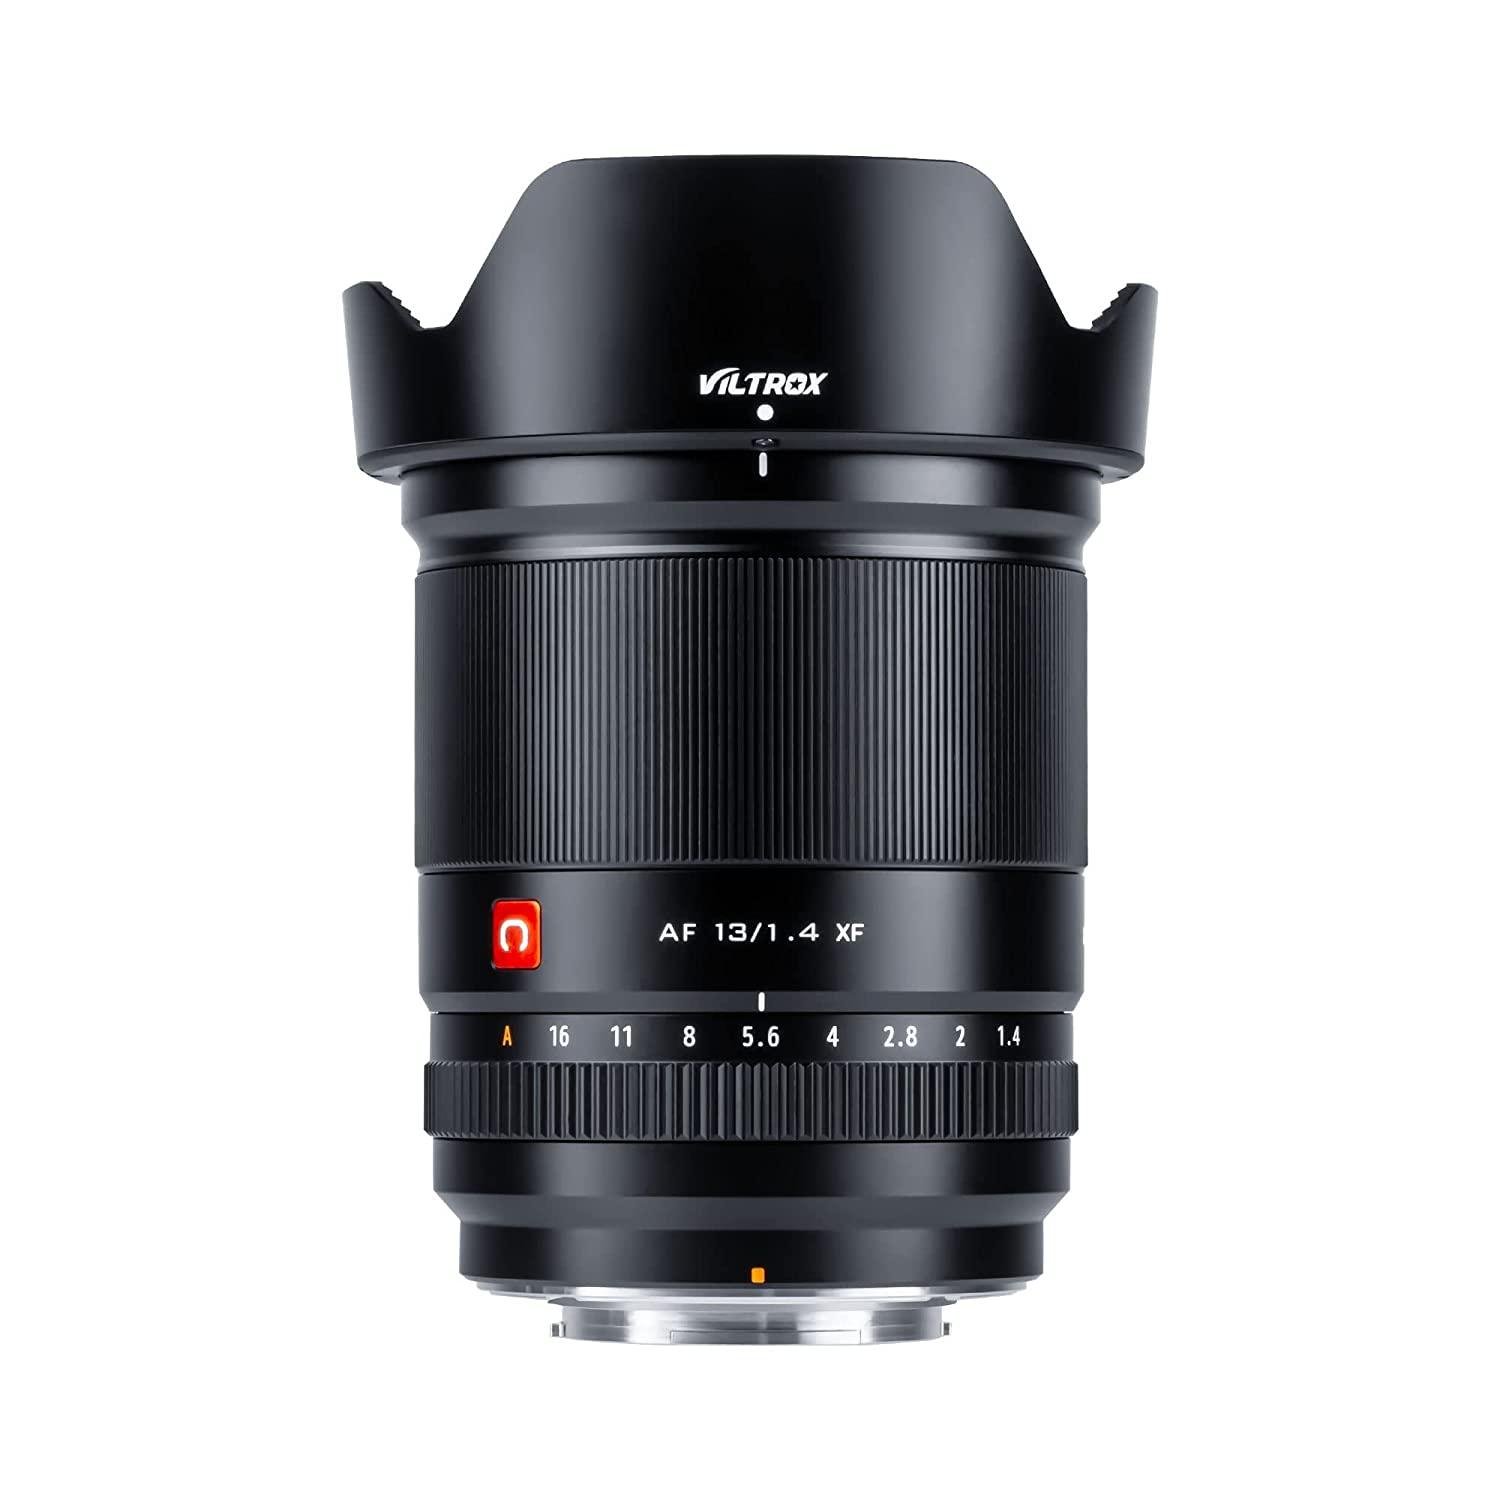 VILTROX 13mm F1.4 XF Auto Focus Ultra Wide Angle Lens Support Eye AF Face Detection for Fujifilm X-Mount Camera X-Pro2 X-Pro3 X-E3 X-E4 X-A10 X-A3 X-A5 X-A7 X-S10 X-T20 X-T3 X-T4 X-T1 X-E2S - Digitek